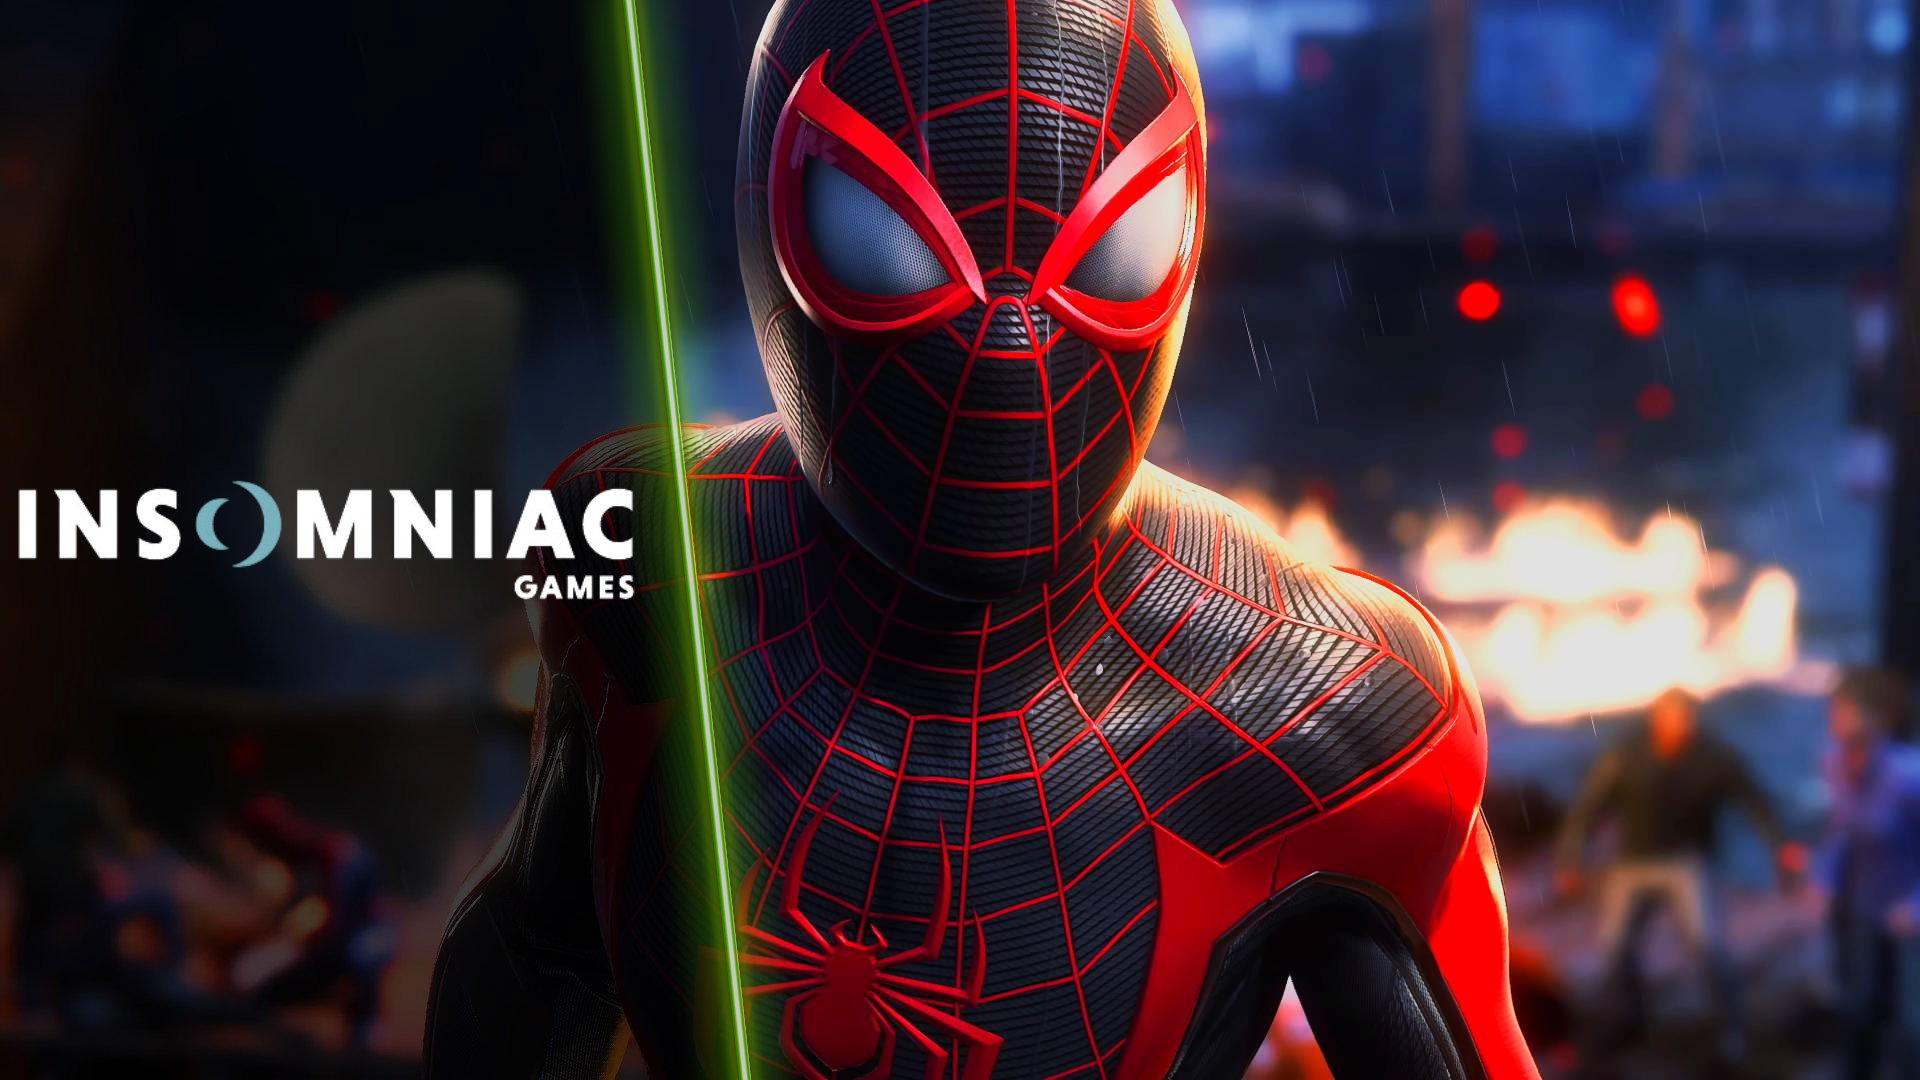 Insomniac Says That Miles Morales Will Be the Main Spider-Man in